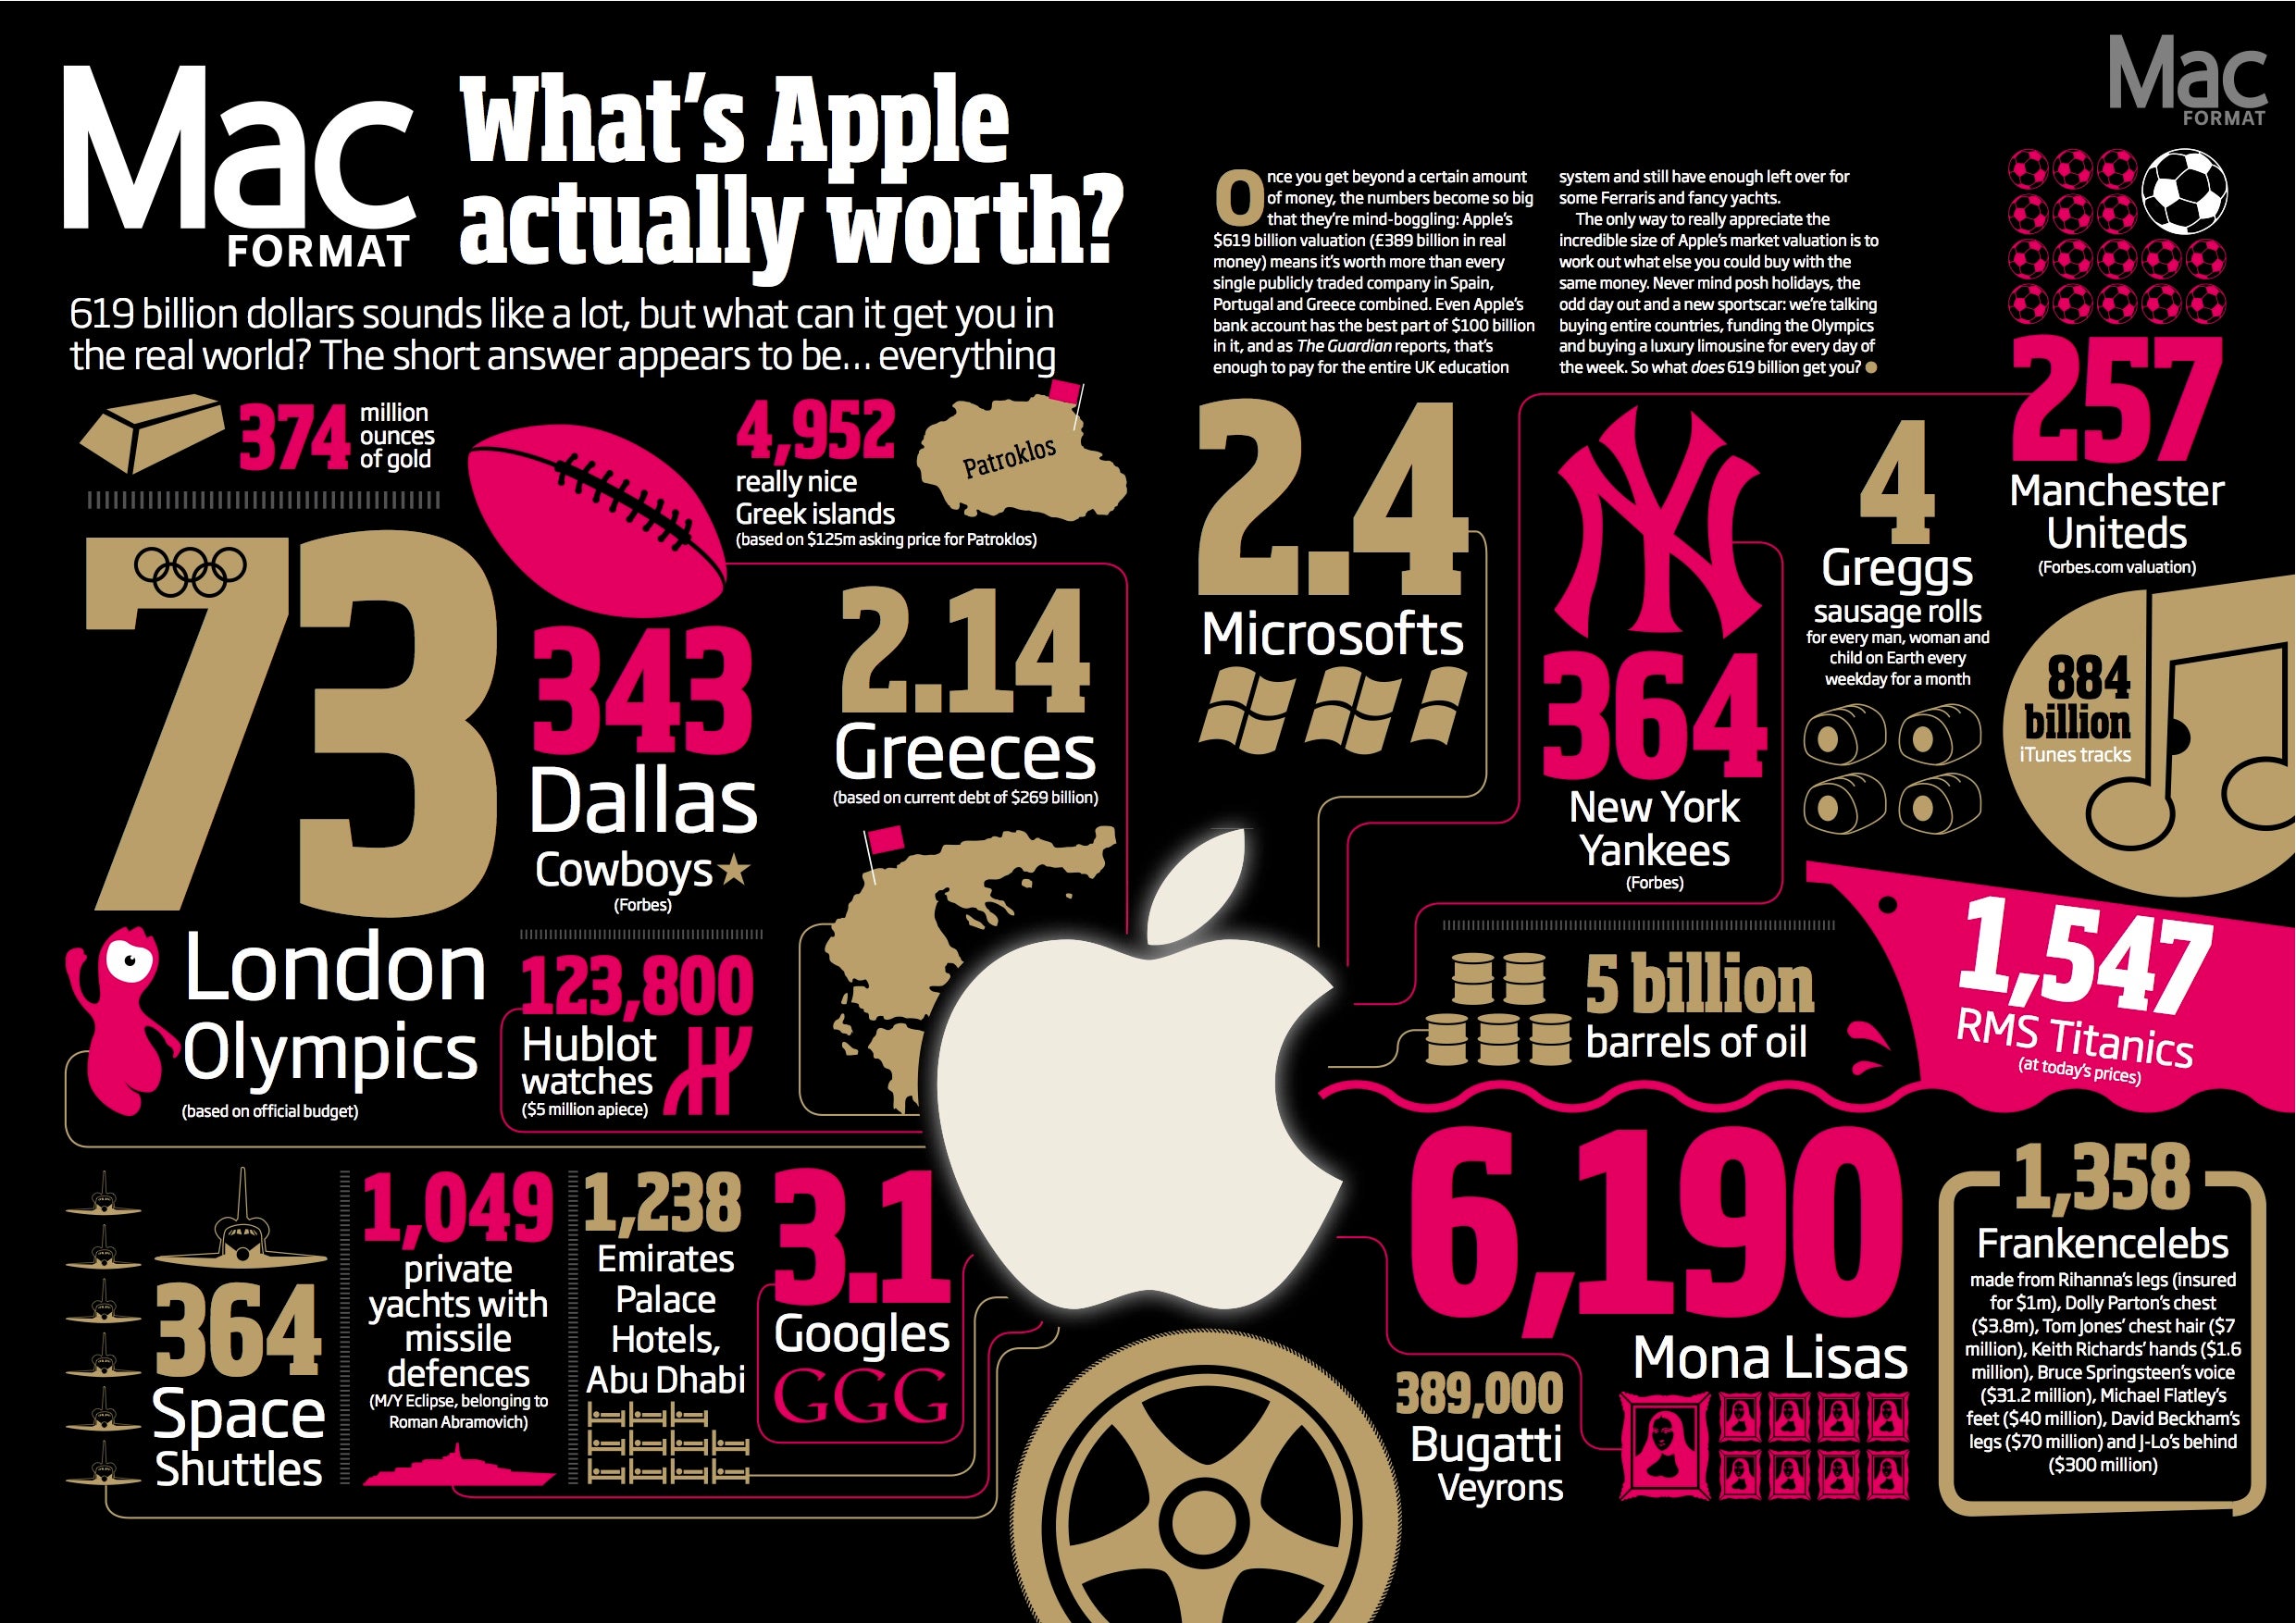 Here's what Apple is really worth in the real world